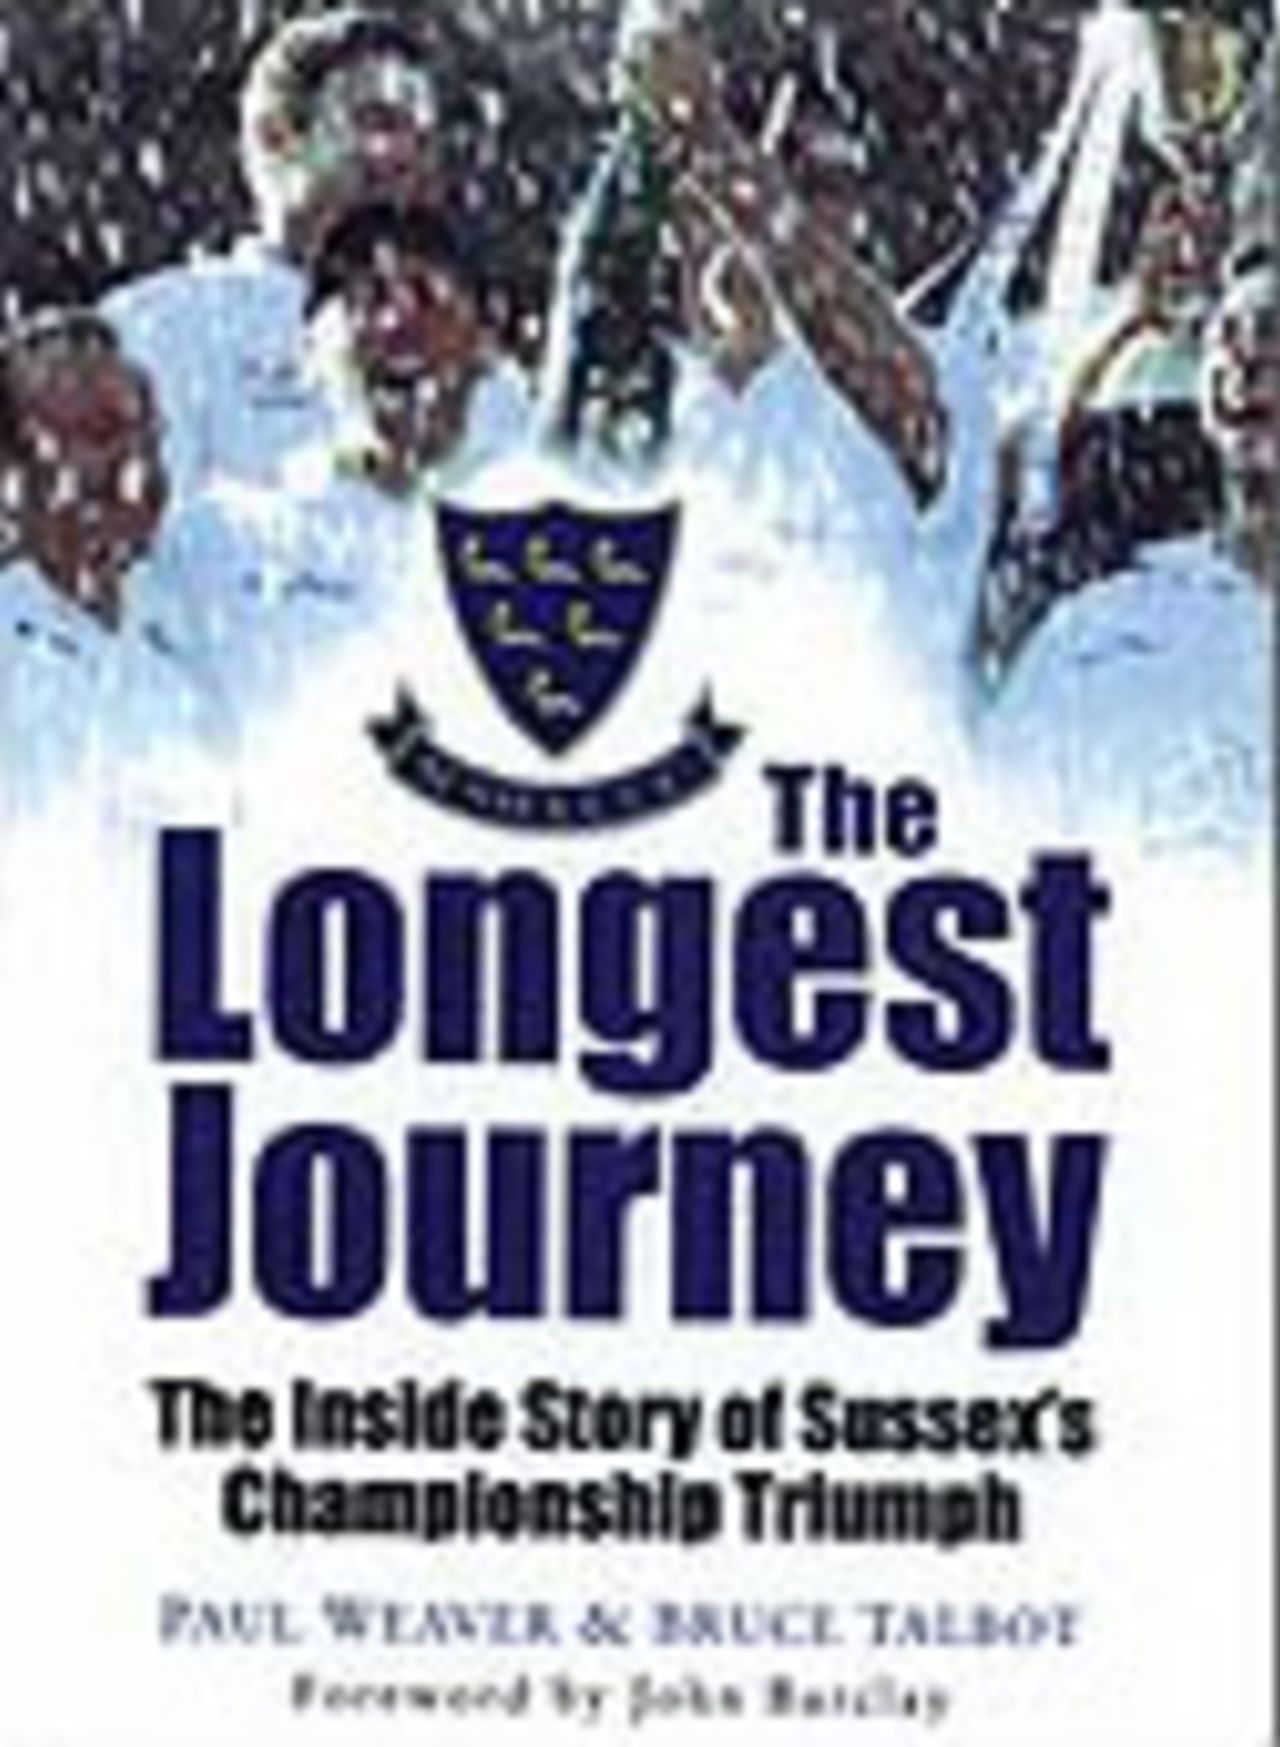 The Longest Journey - The Inside Story of Sussex's Championship Triumph